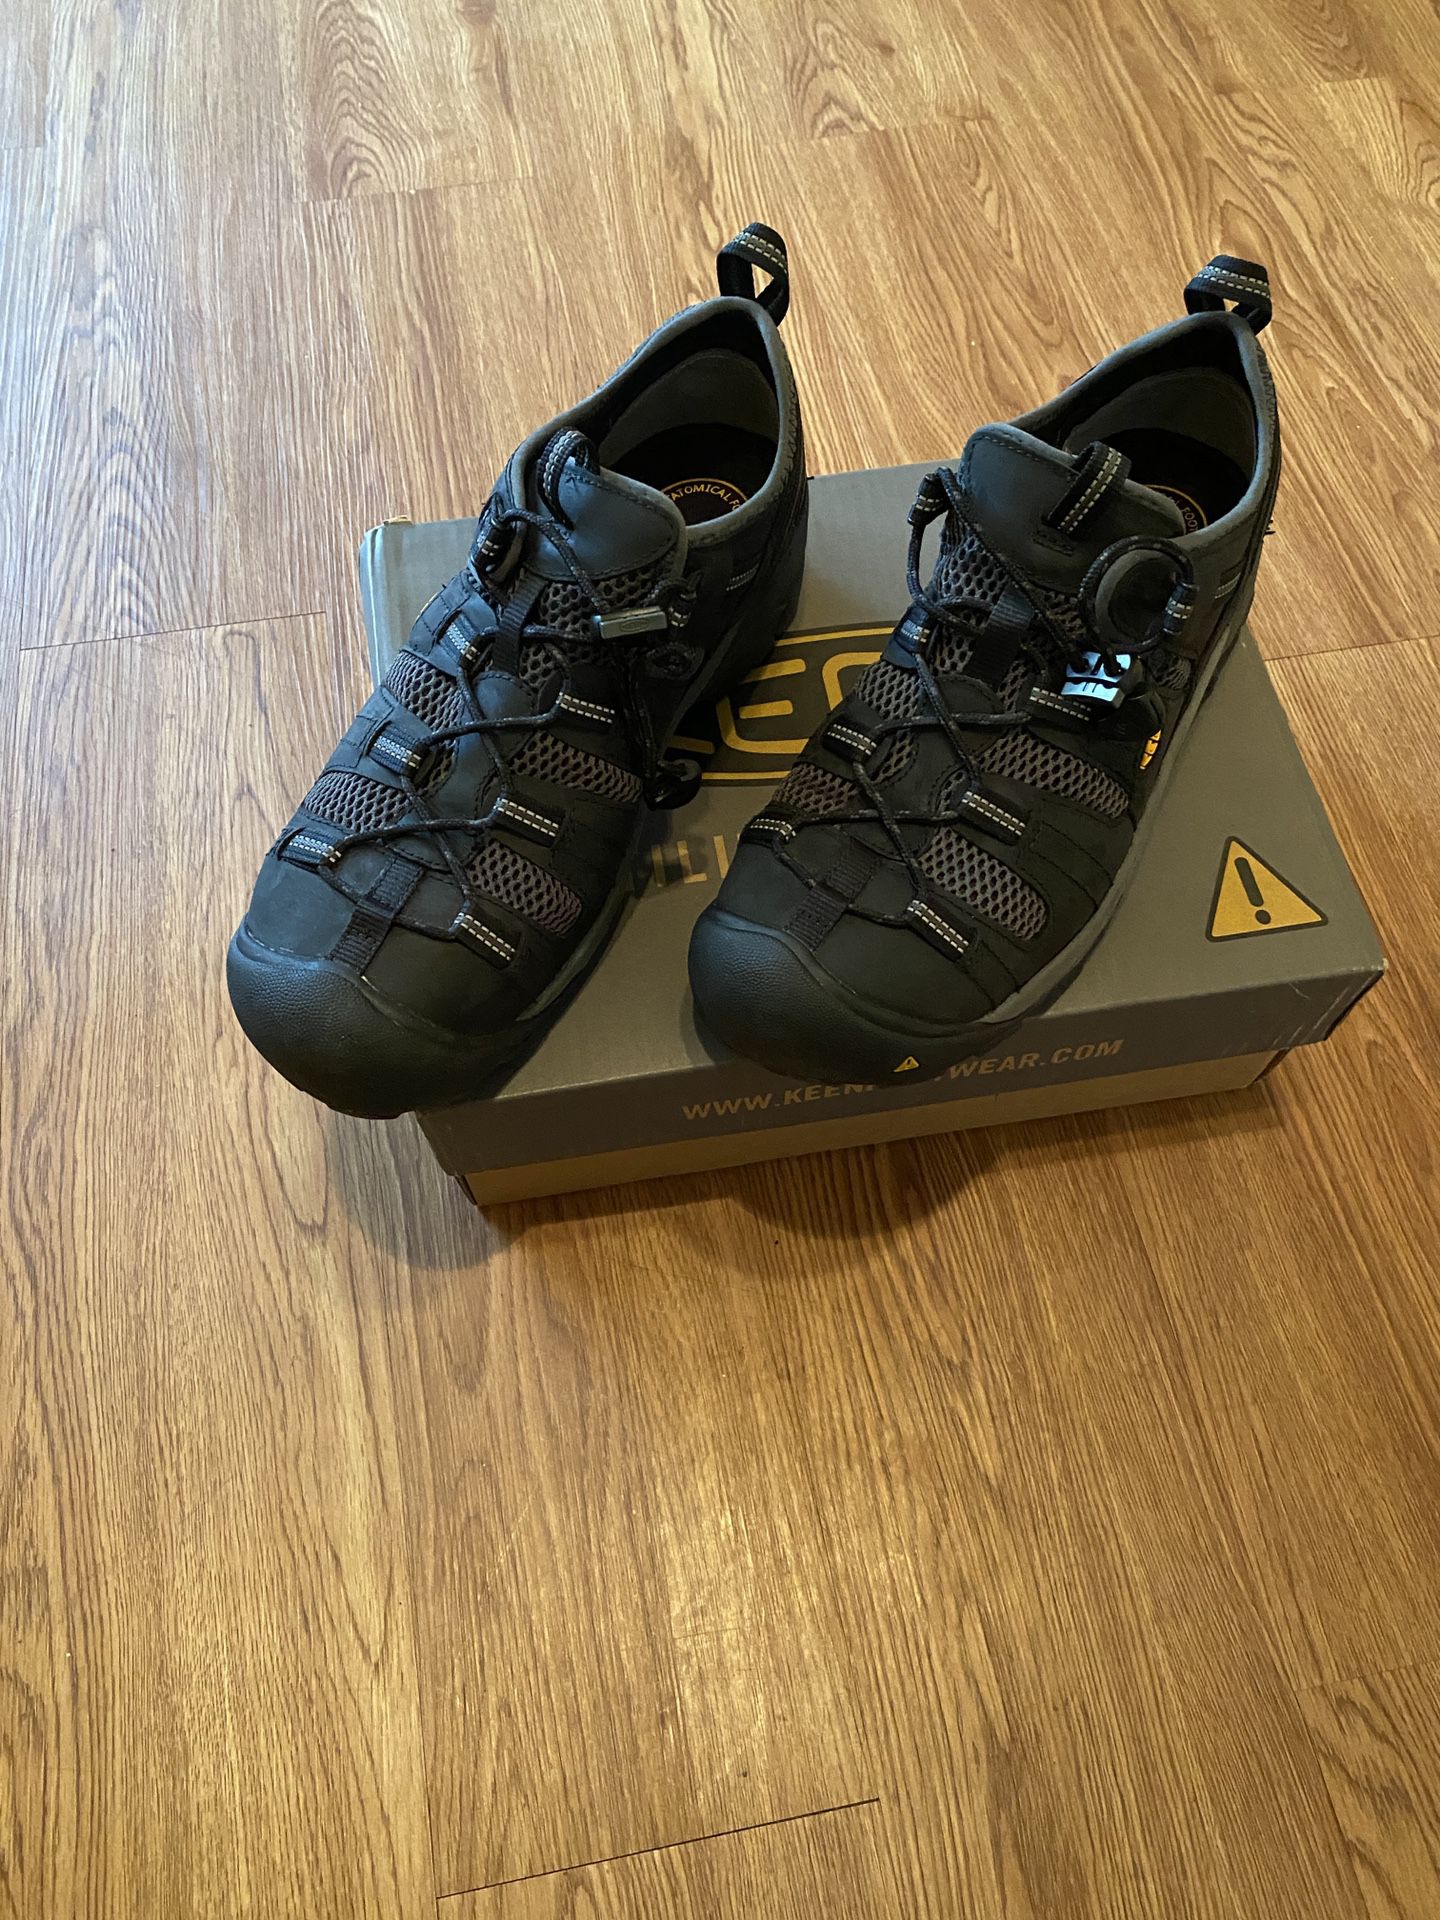 Keen utility shoes size 10